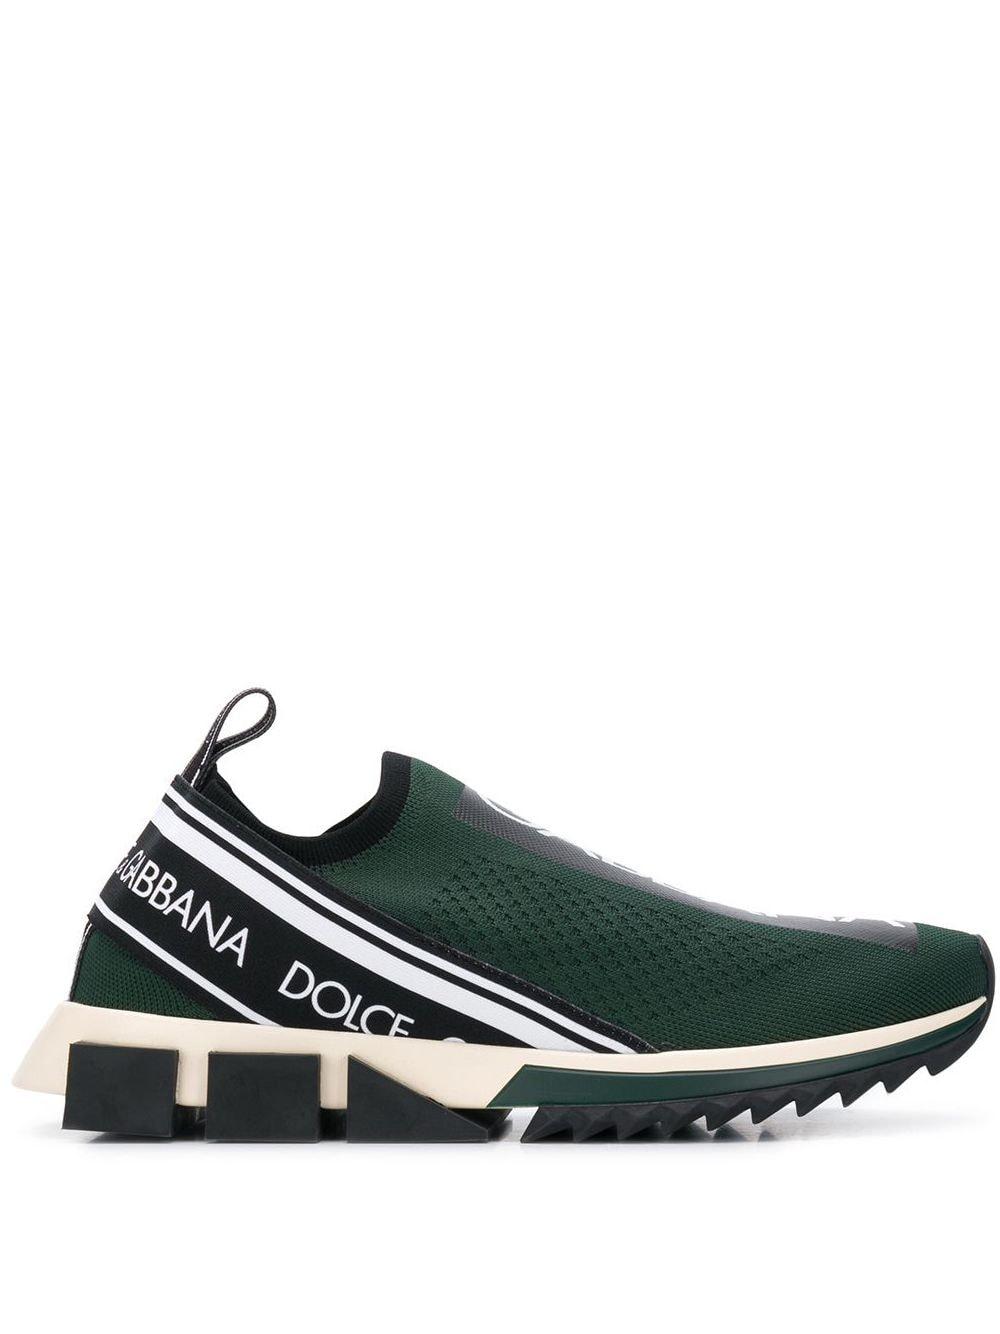 dolce and gabbana shoes green